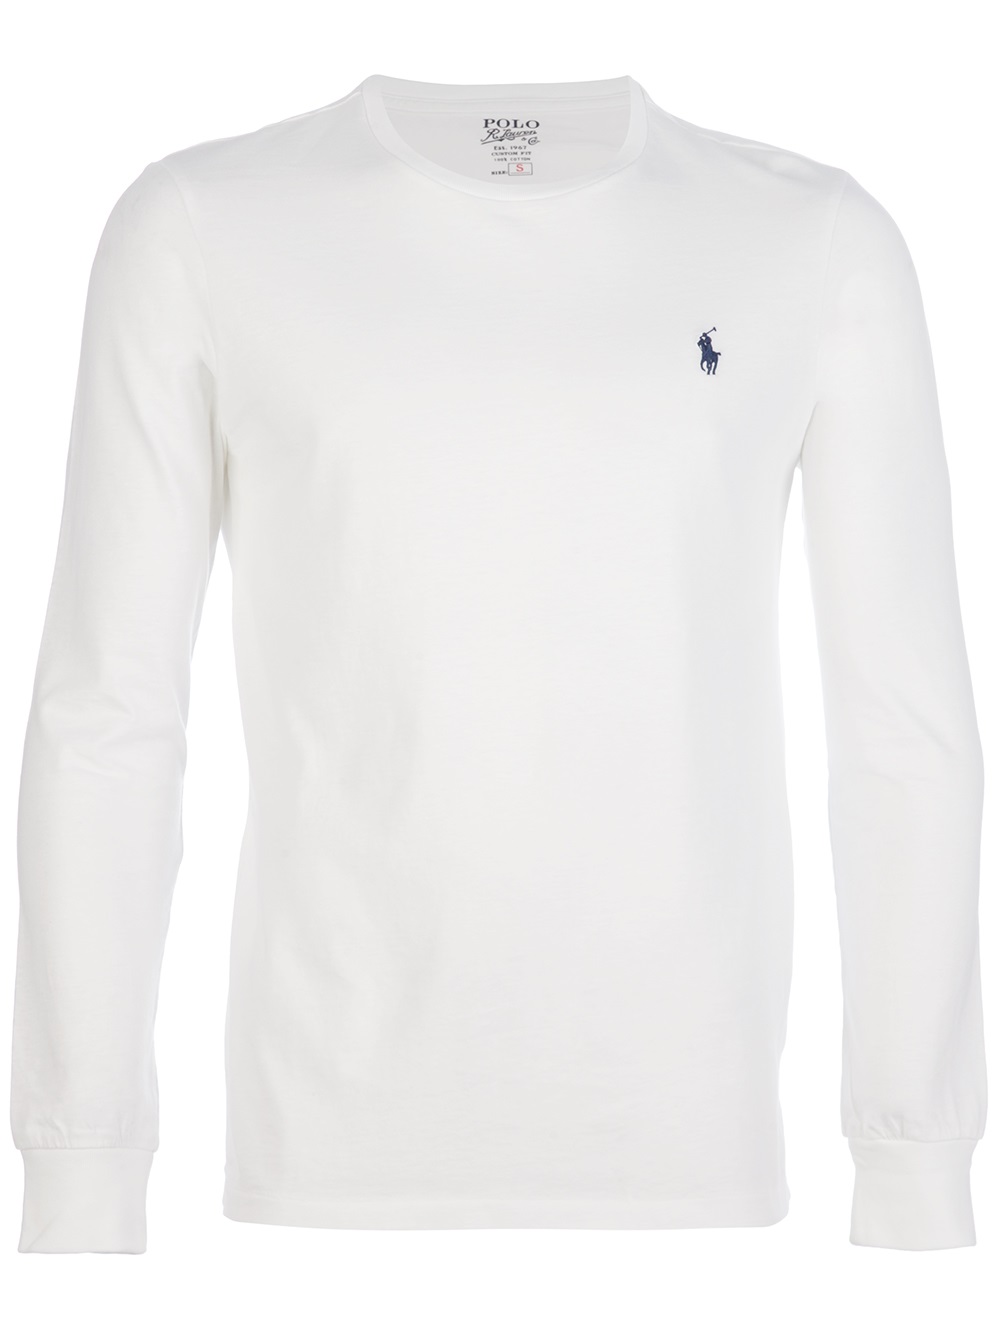 Diego wholesale ralph lauren white long sleeve t shirt online red